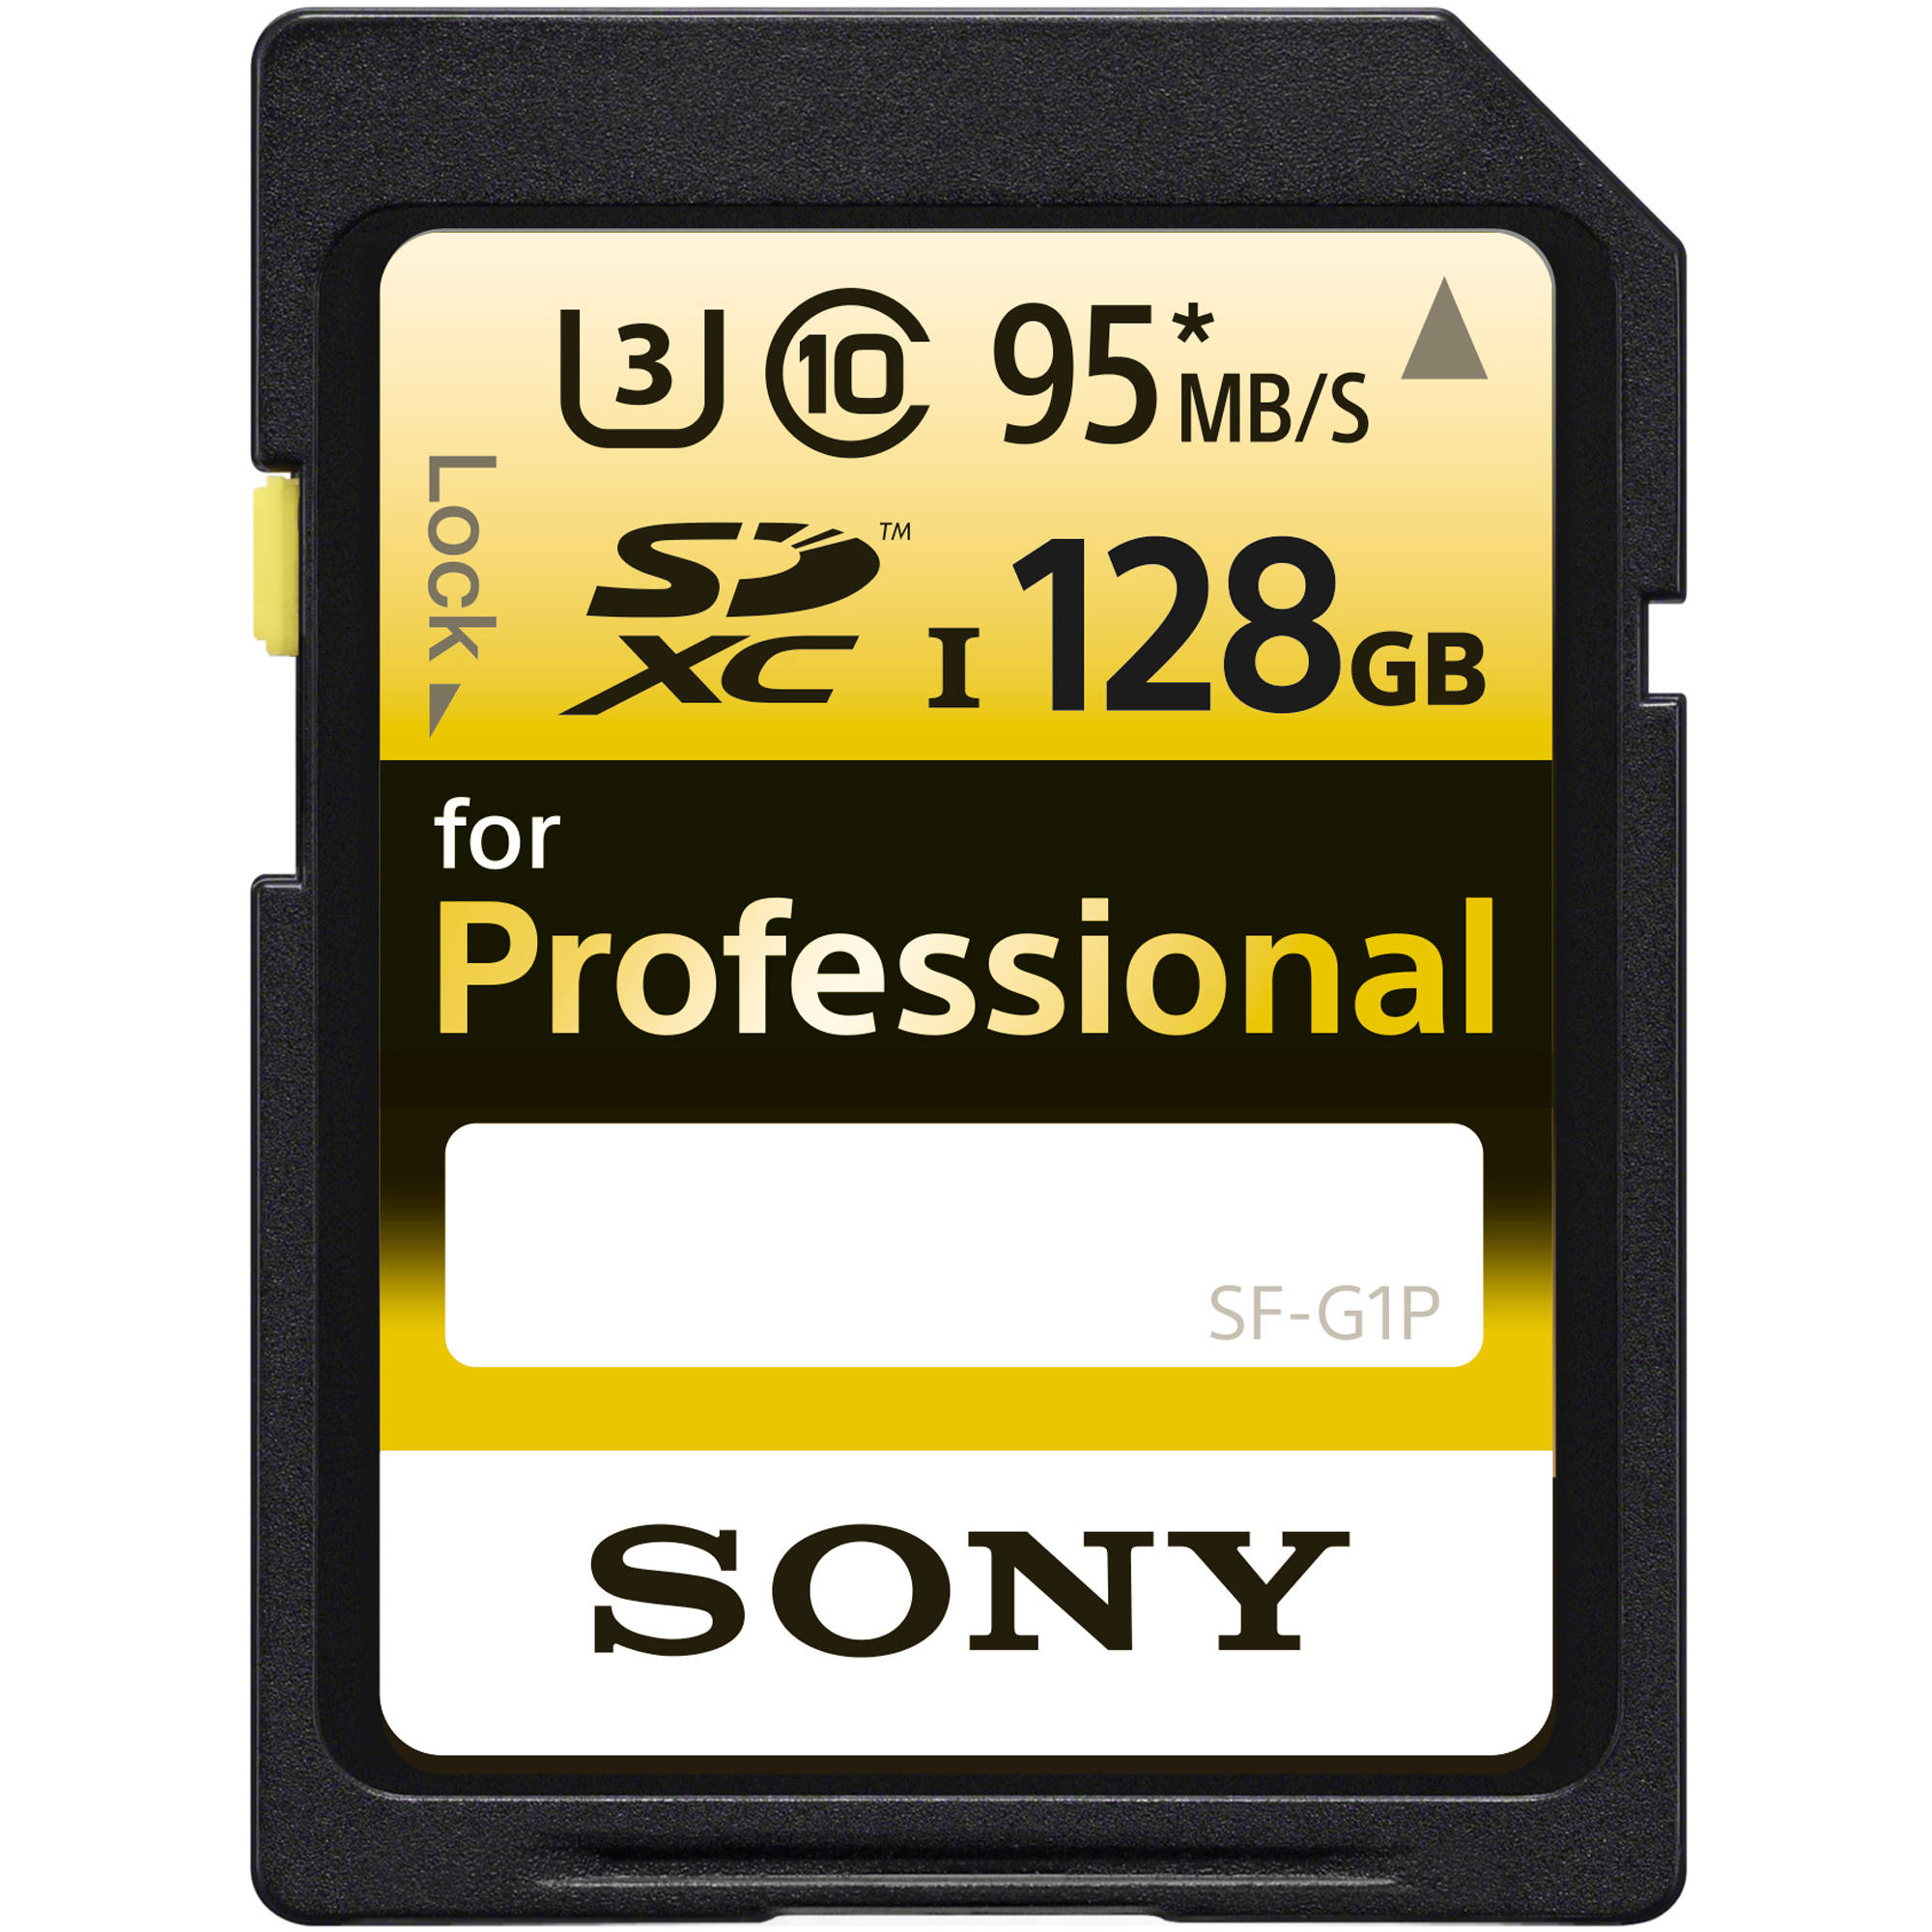 Sony Professional 128GB SD Card For Professional Use